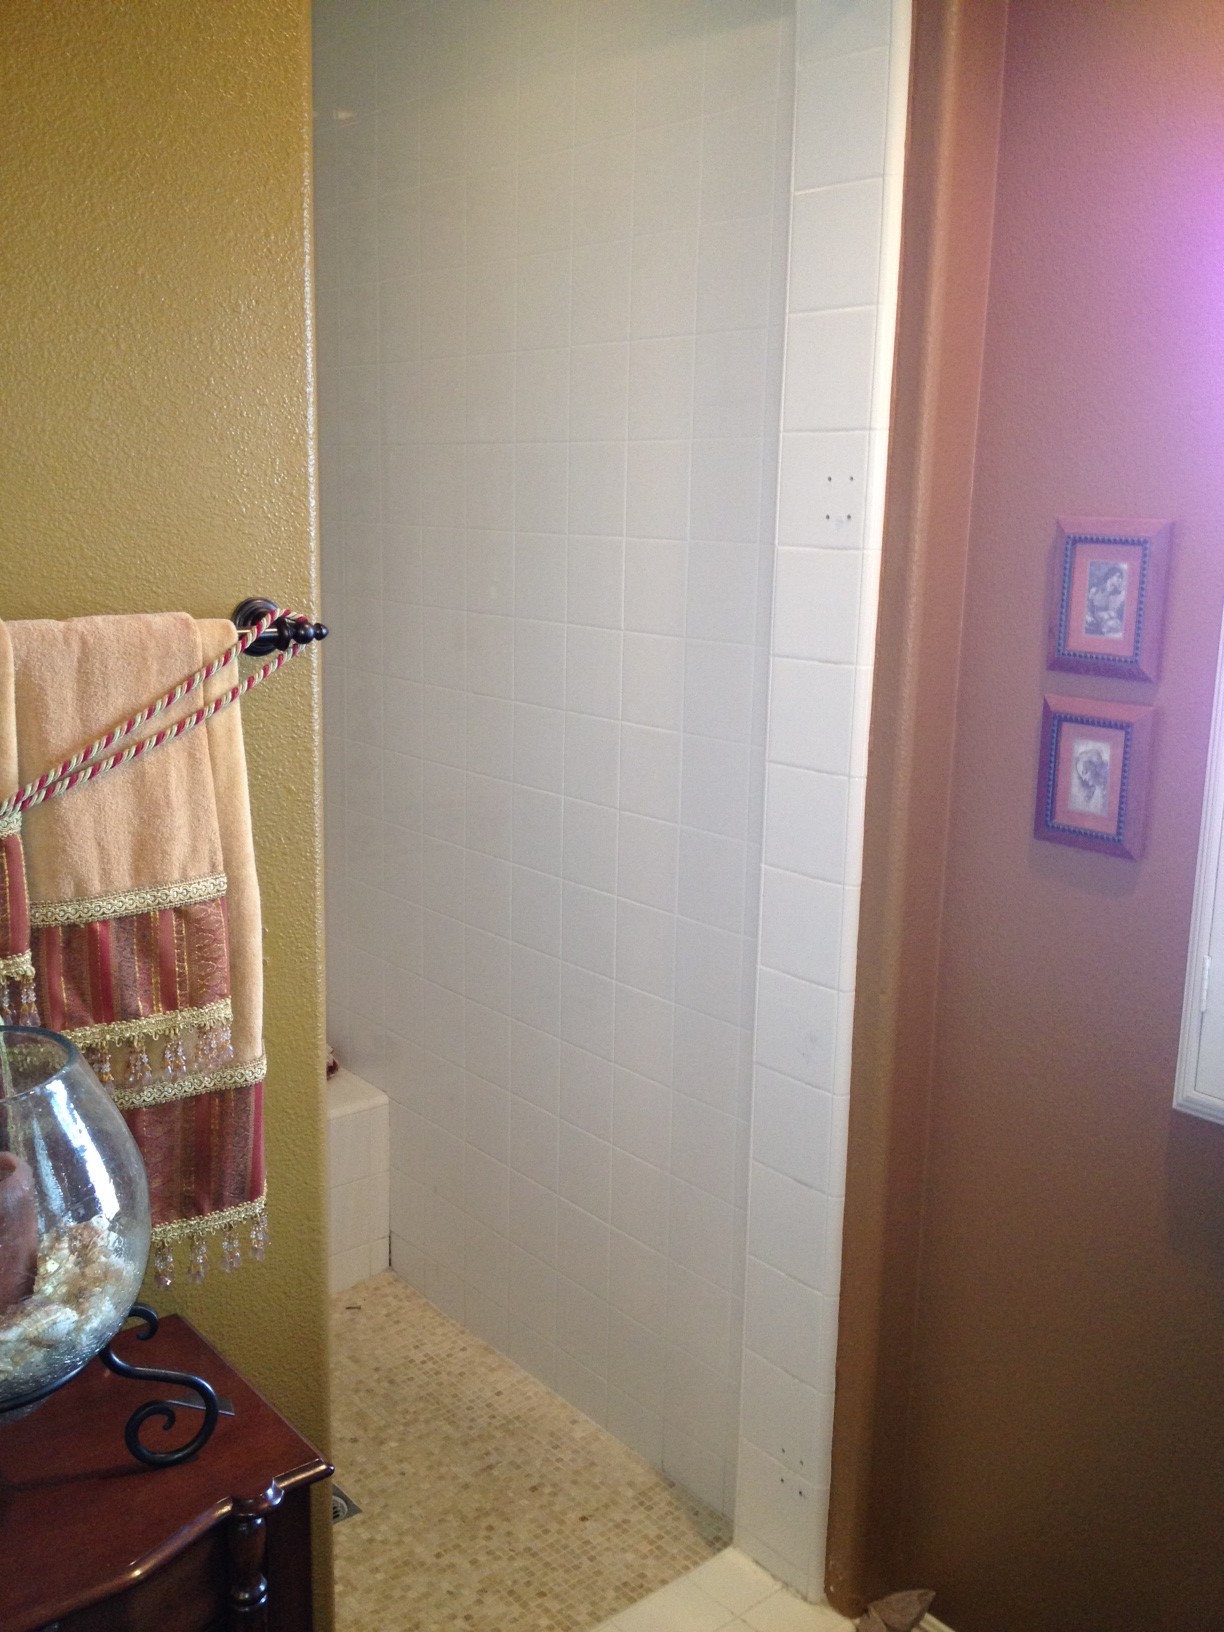 This opening had a shower door that was corroded and falling apart - OnTrack San Diego replaced it with quality hardware.